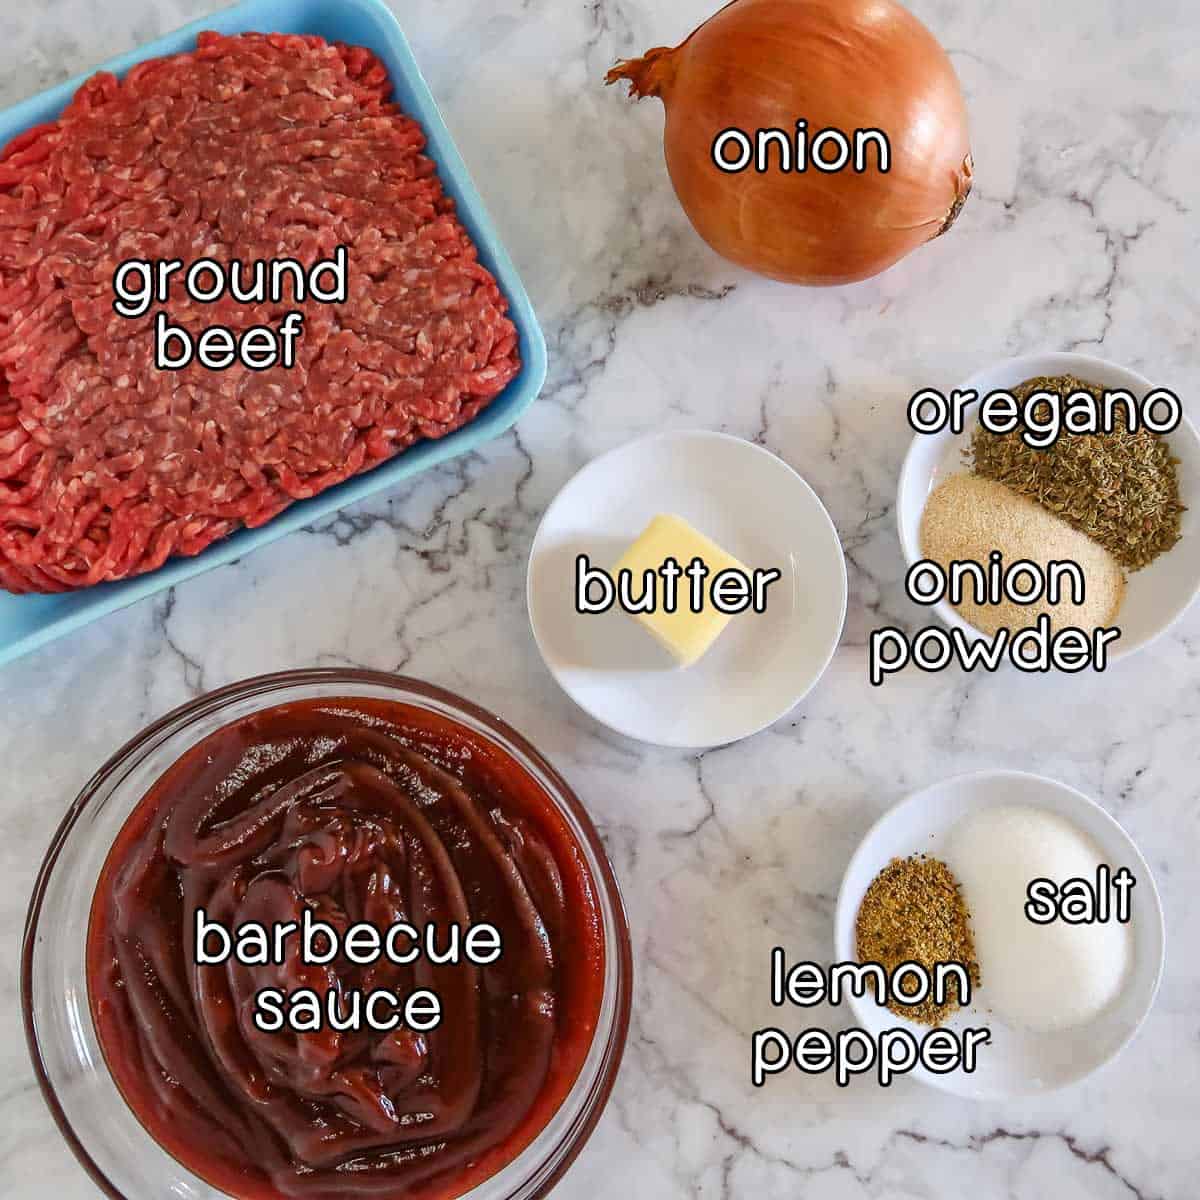 Overhead shot of ingredients - ground beef, onion, butter, barbecue sauce, oregano, onion powder, salt, and lemon pepper.